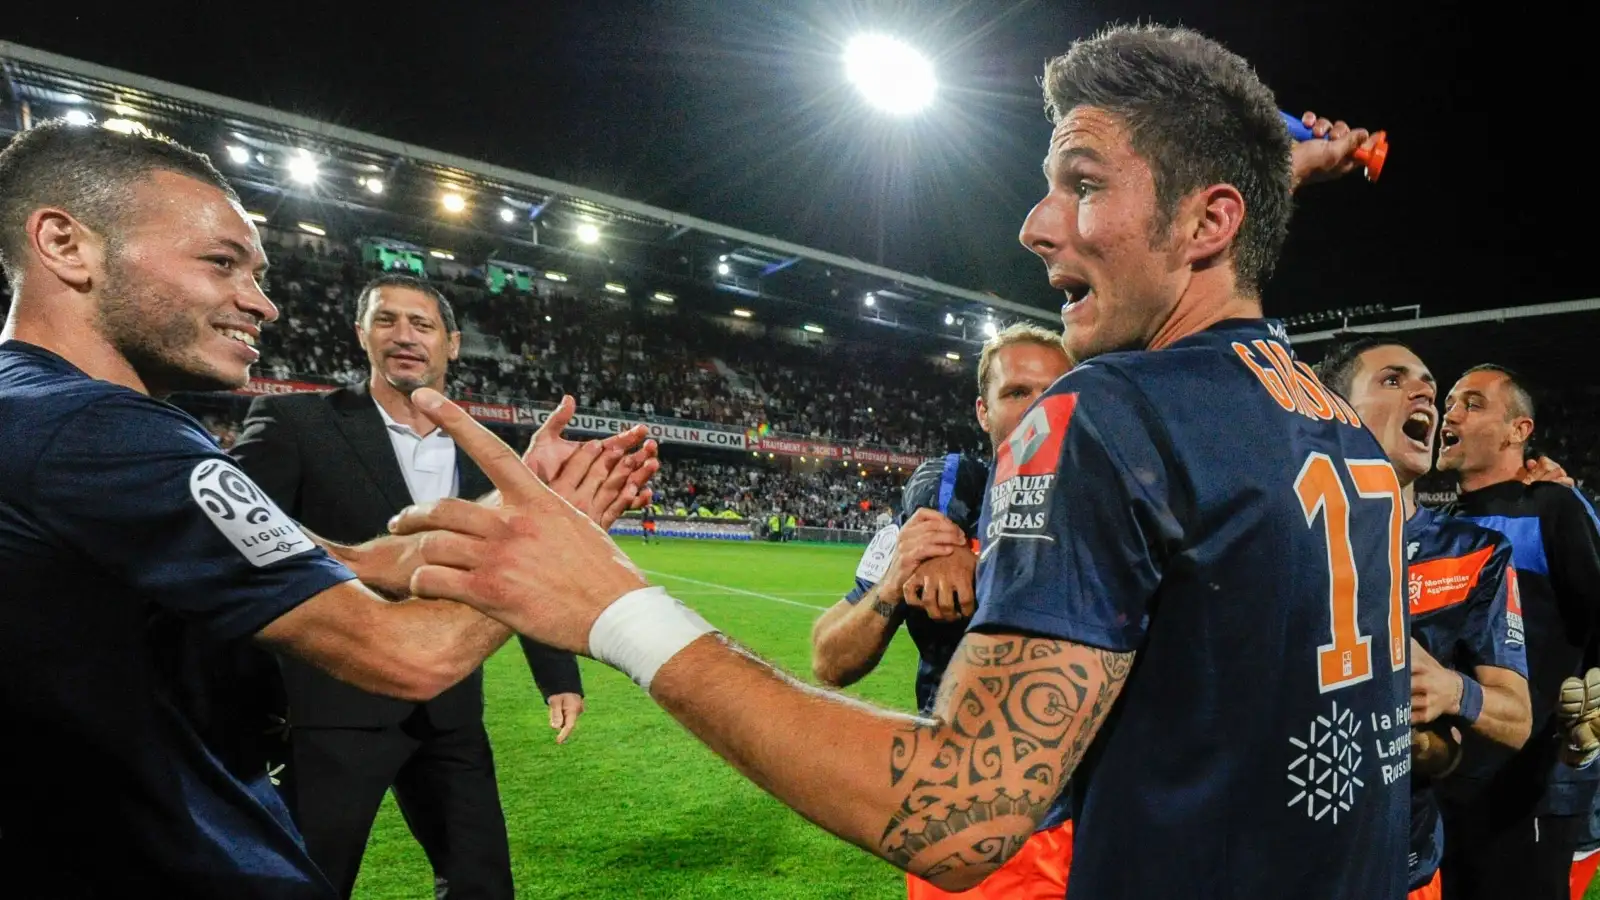 The story of Olivier Giroud inspiring Montpellier to the title ahead of PSG